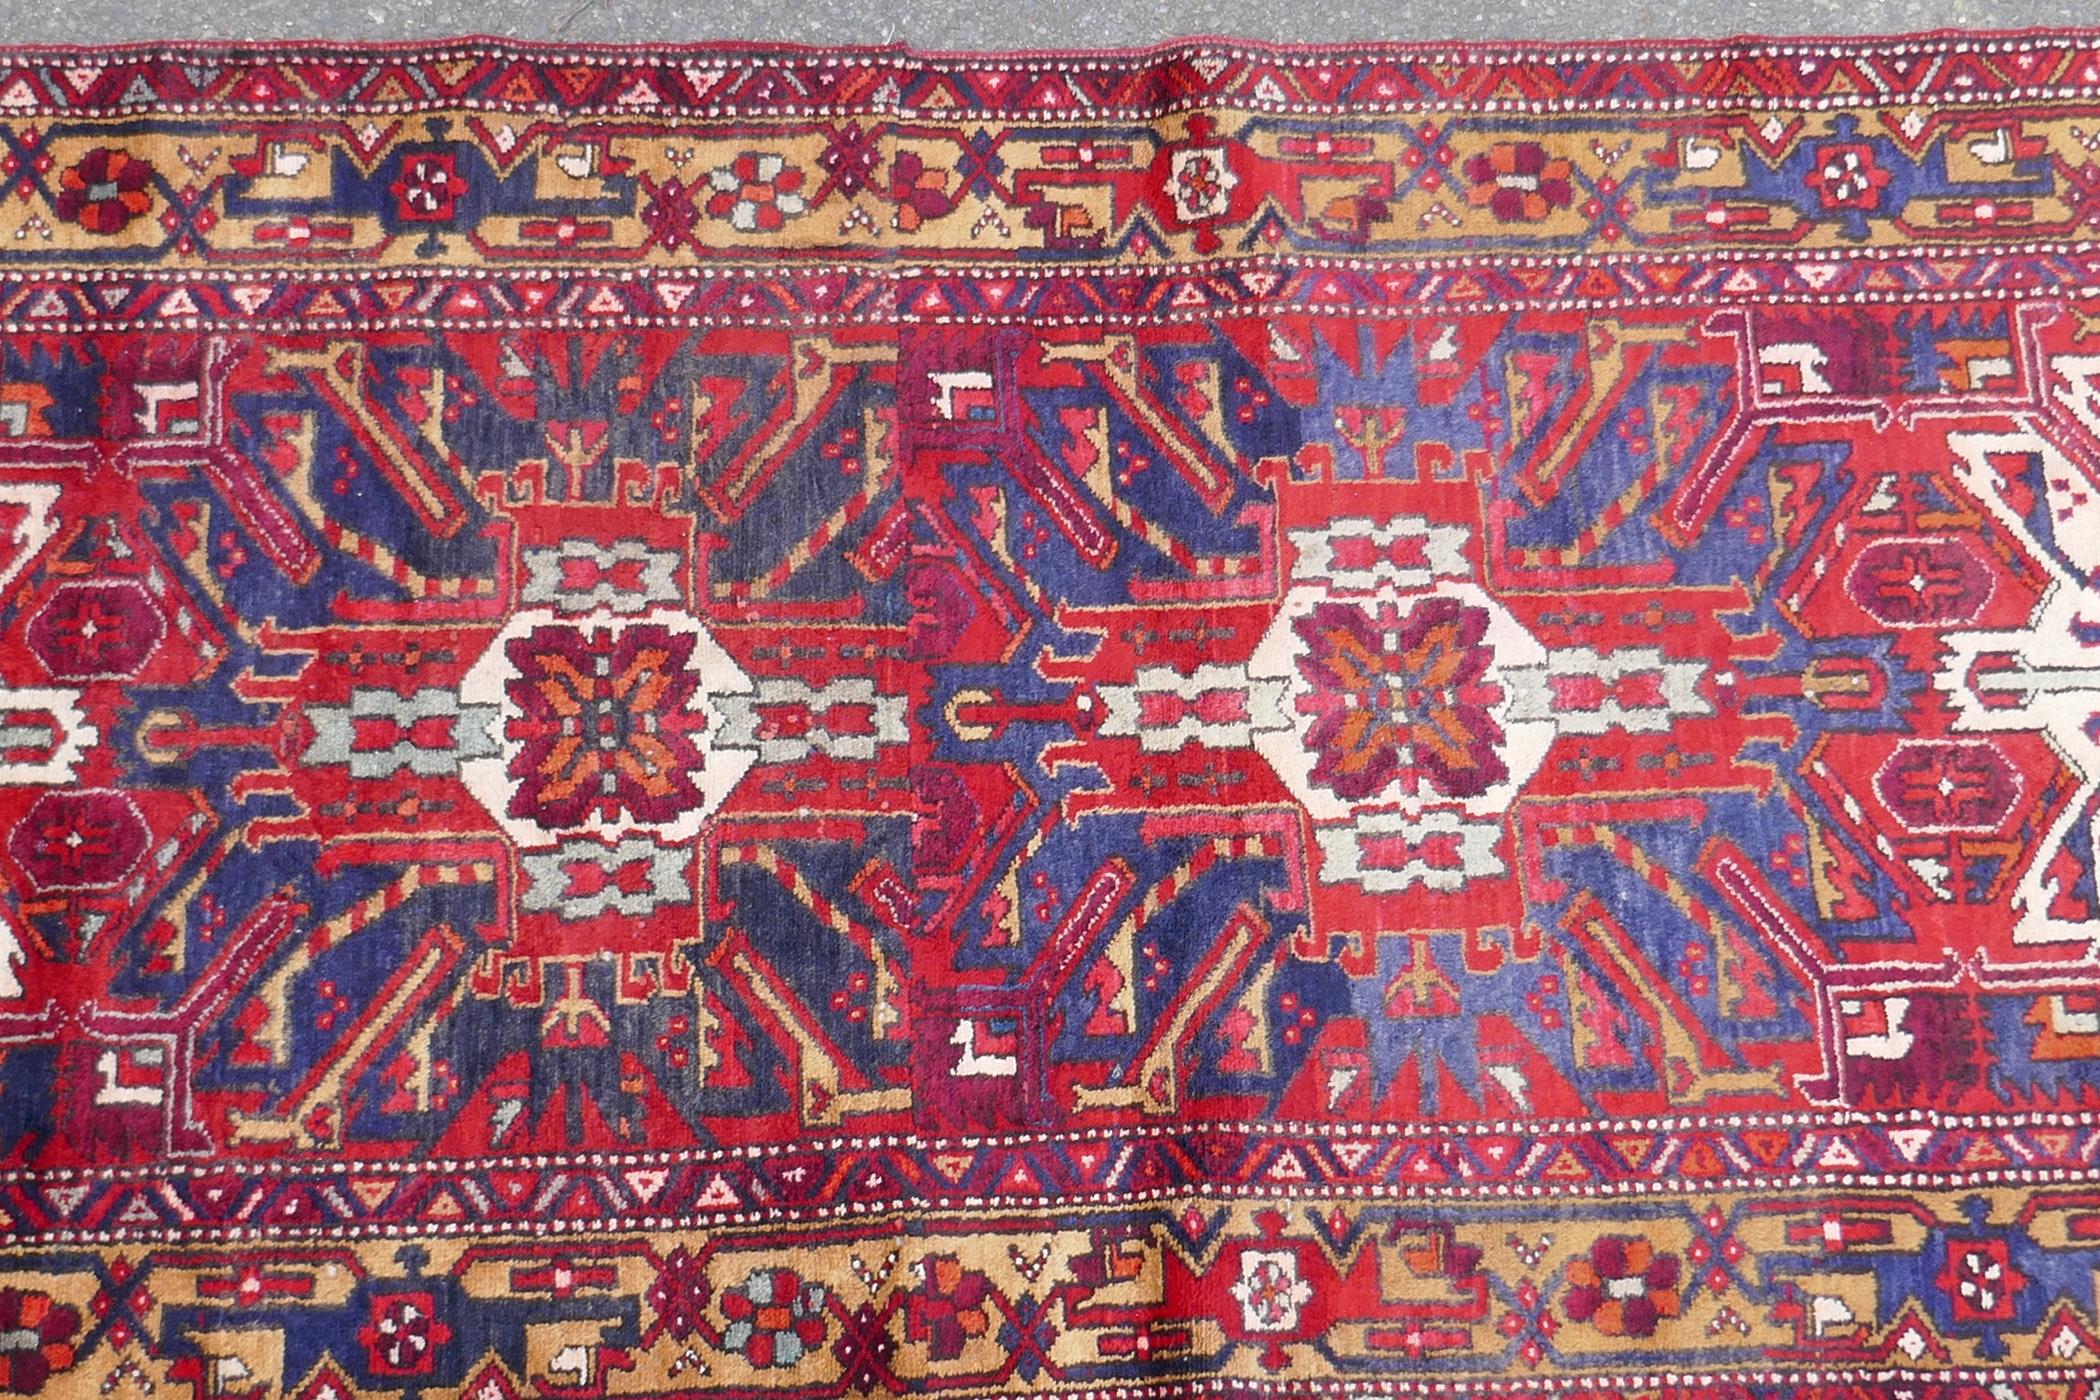 A Persian red ground Heritz runner with a starburst medallion design, 46" x 131" - Image 2 of 8